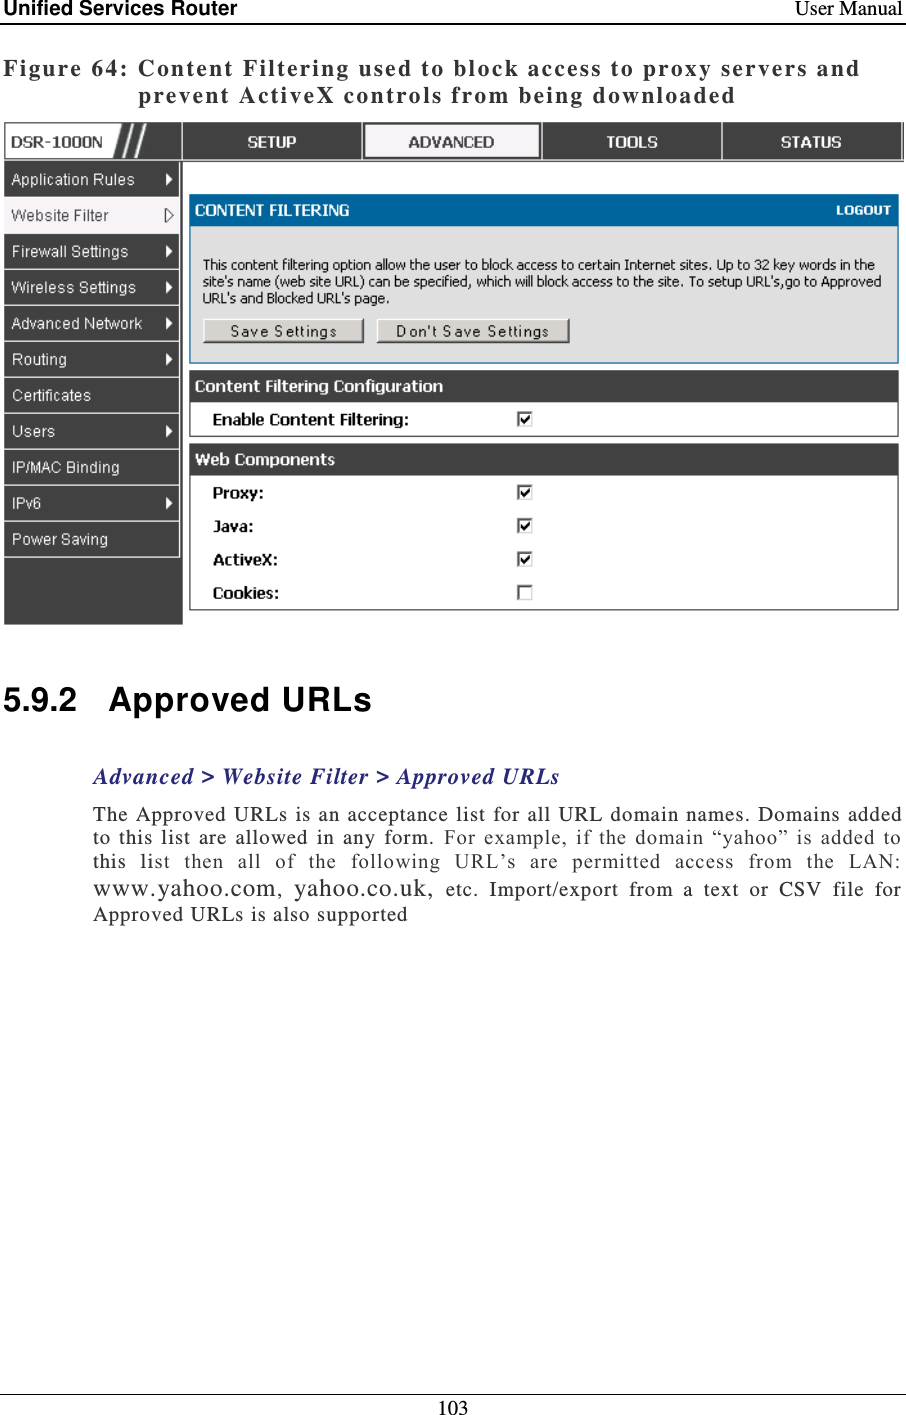 Unified Services Router    User Manual 103  Figure 64: Content  Filtering used to bl ock access to proxy servers and prevent ActiveX co ntrols from being downloaded    5.9.2  Approved URLs Advanced &gt; Website Filter &gt; Approved URLs The Approved URLs is an  acceptance list for all URL  domain  names. Domains added to  this  list  are  allowed  in  any  form.  For  example,  if  the  domain  “yahoo”  is  added  to this  list  then  all  of  the  following  URL’s  are  permitted  access  from  the  LAN: www.yahoo.com,  yahoo.co.uk,  etc.  Import/export  from  a  text  or  CSV  file  for Approved URLs is also supported 